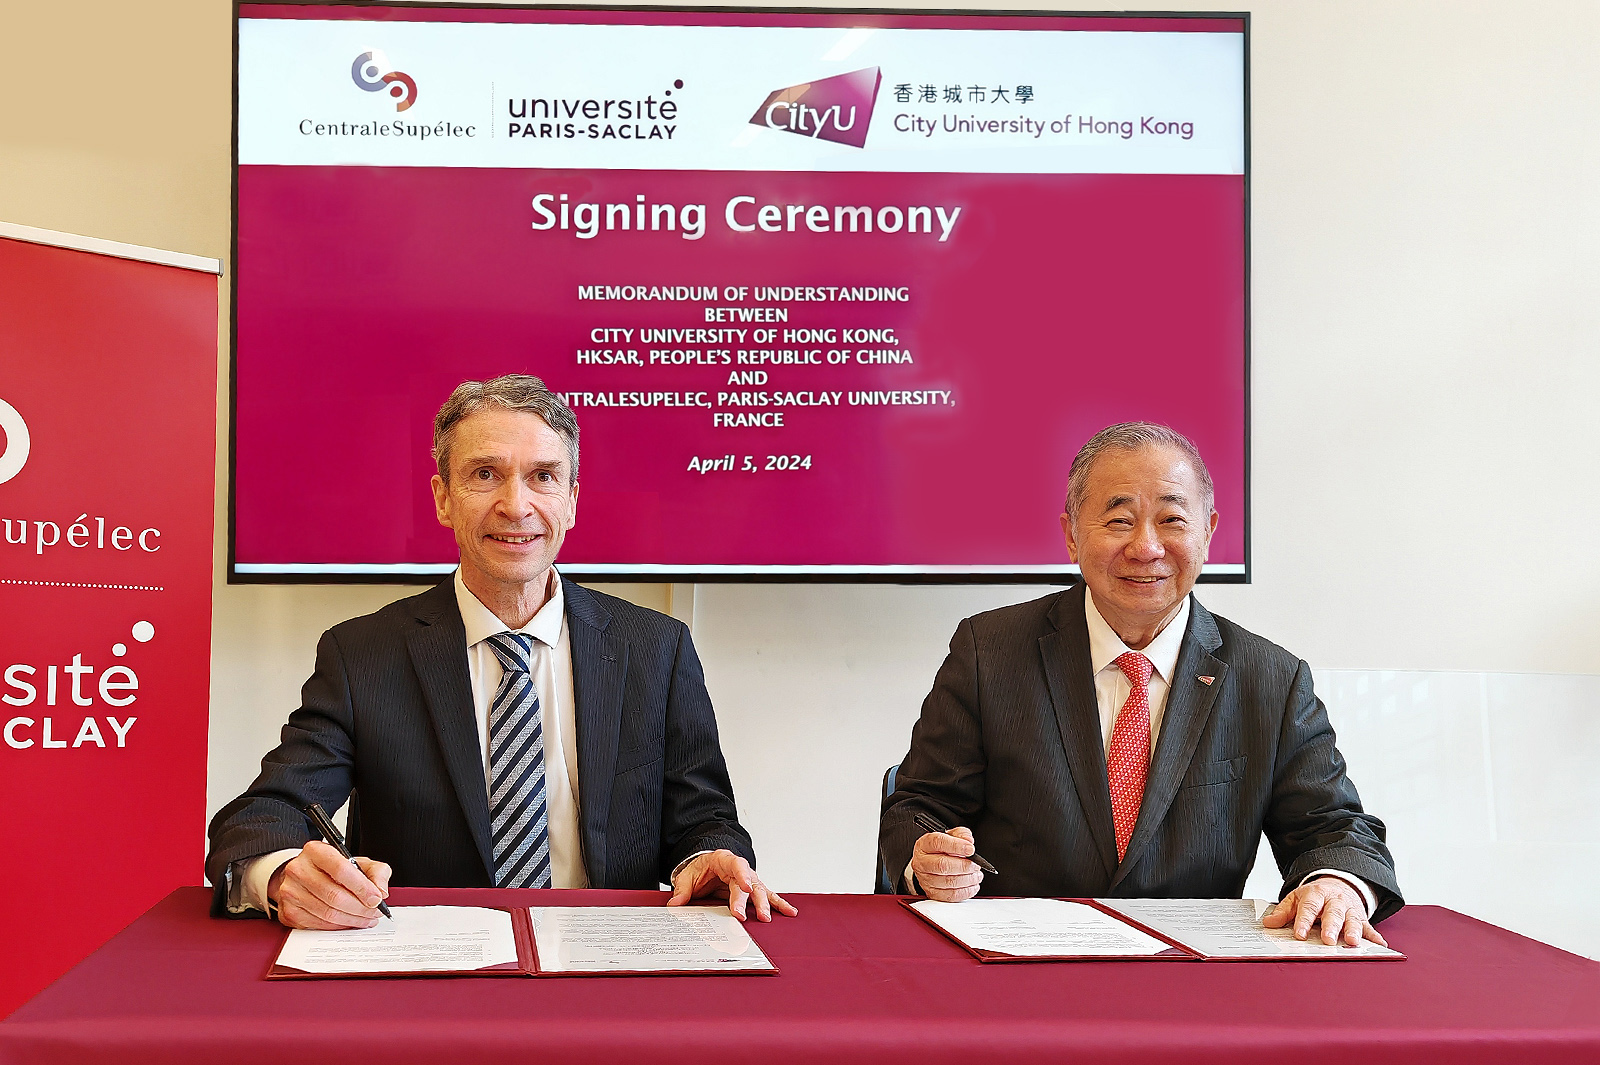 President Boey (right) and Professor Soubeyran signed an MoU to foster academic exchange and further develop the co-operative relationship between CityUHK and CentraleSupélec, Paris-Saclay University.